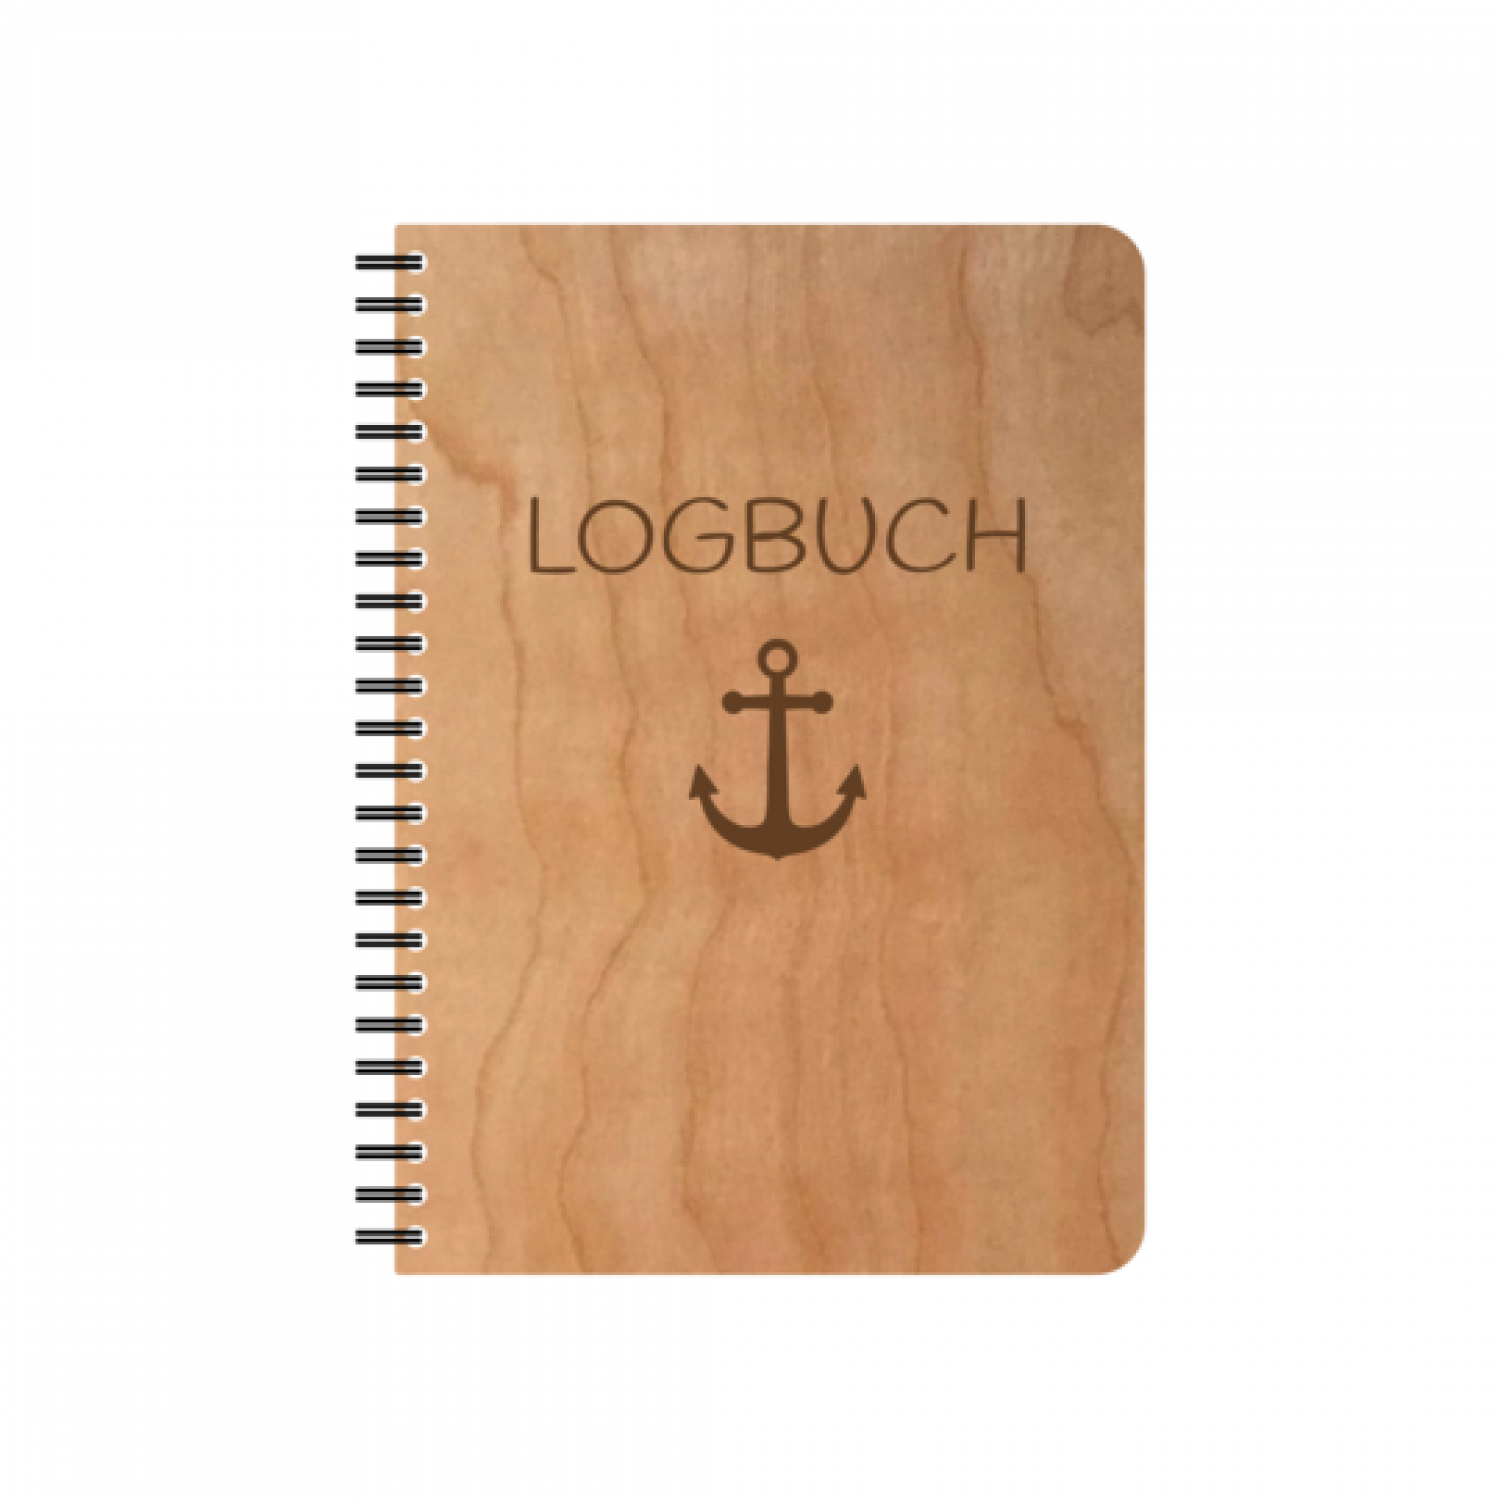 Logbook refillable eco notebook with cherrywood veneer cover